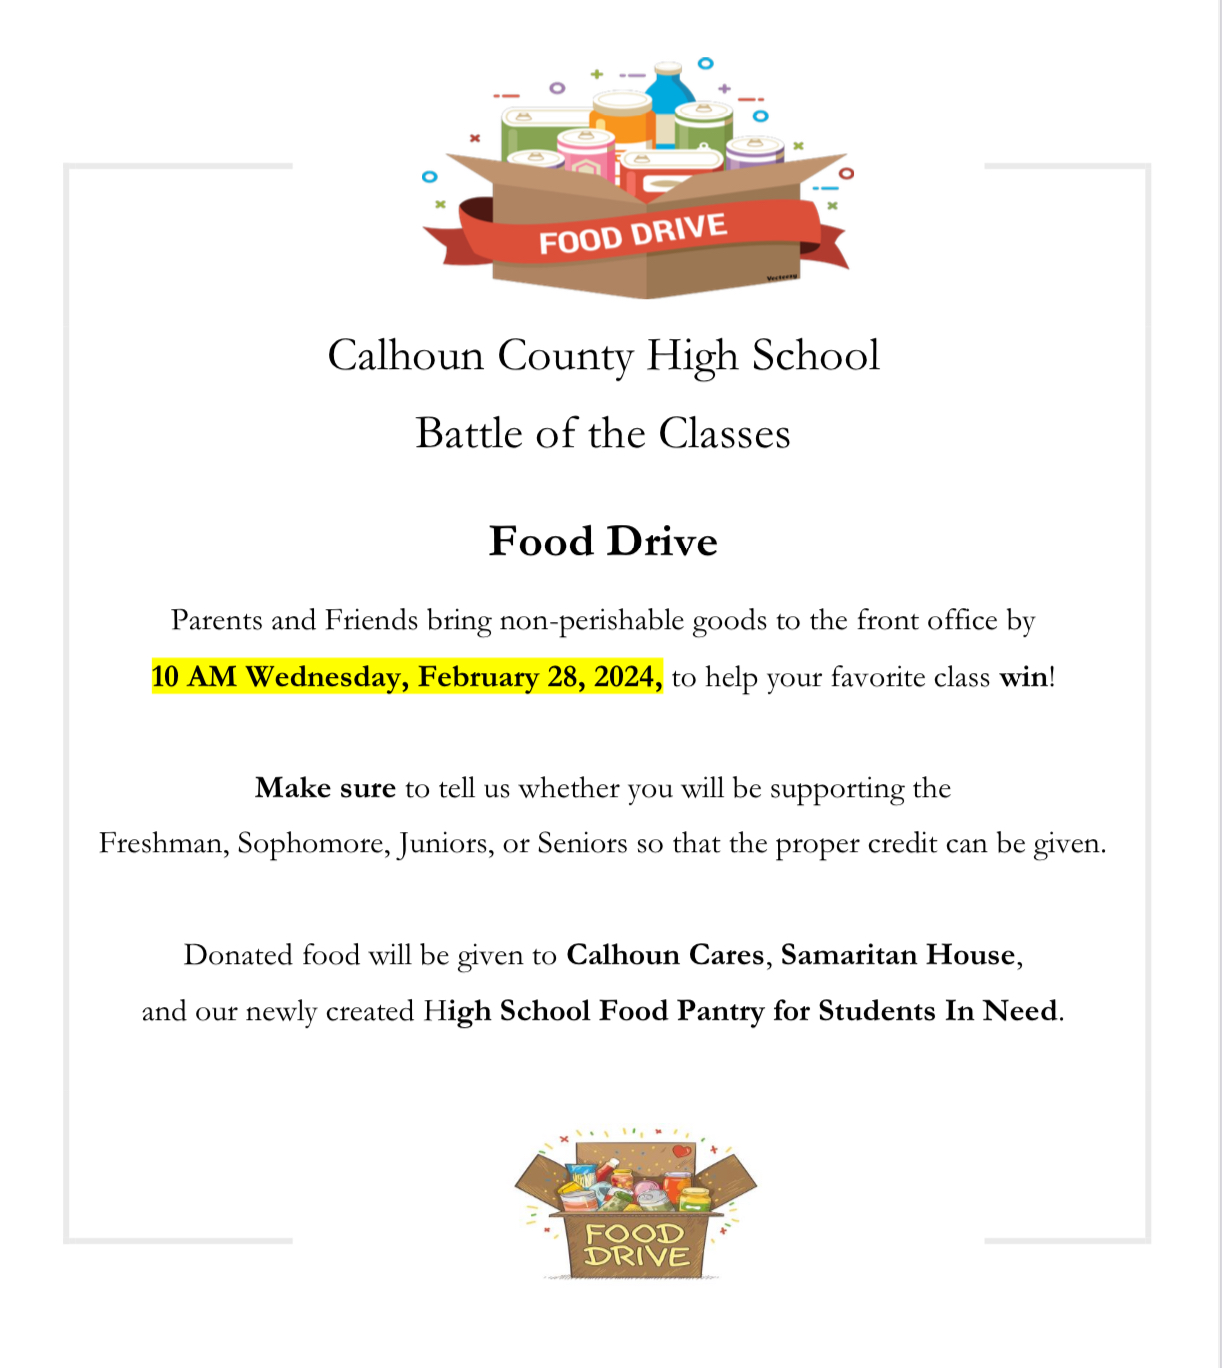 Our students at CCHS are hosting a good drive.  If you want to help, please bring your donation to the front office and let them know which class you are supporting.